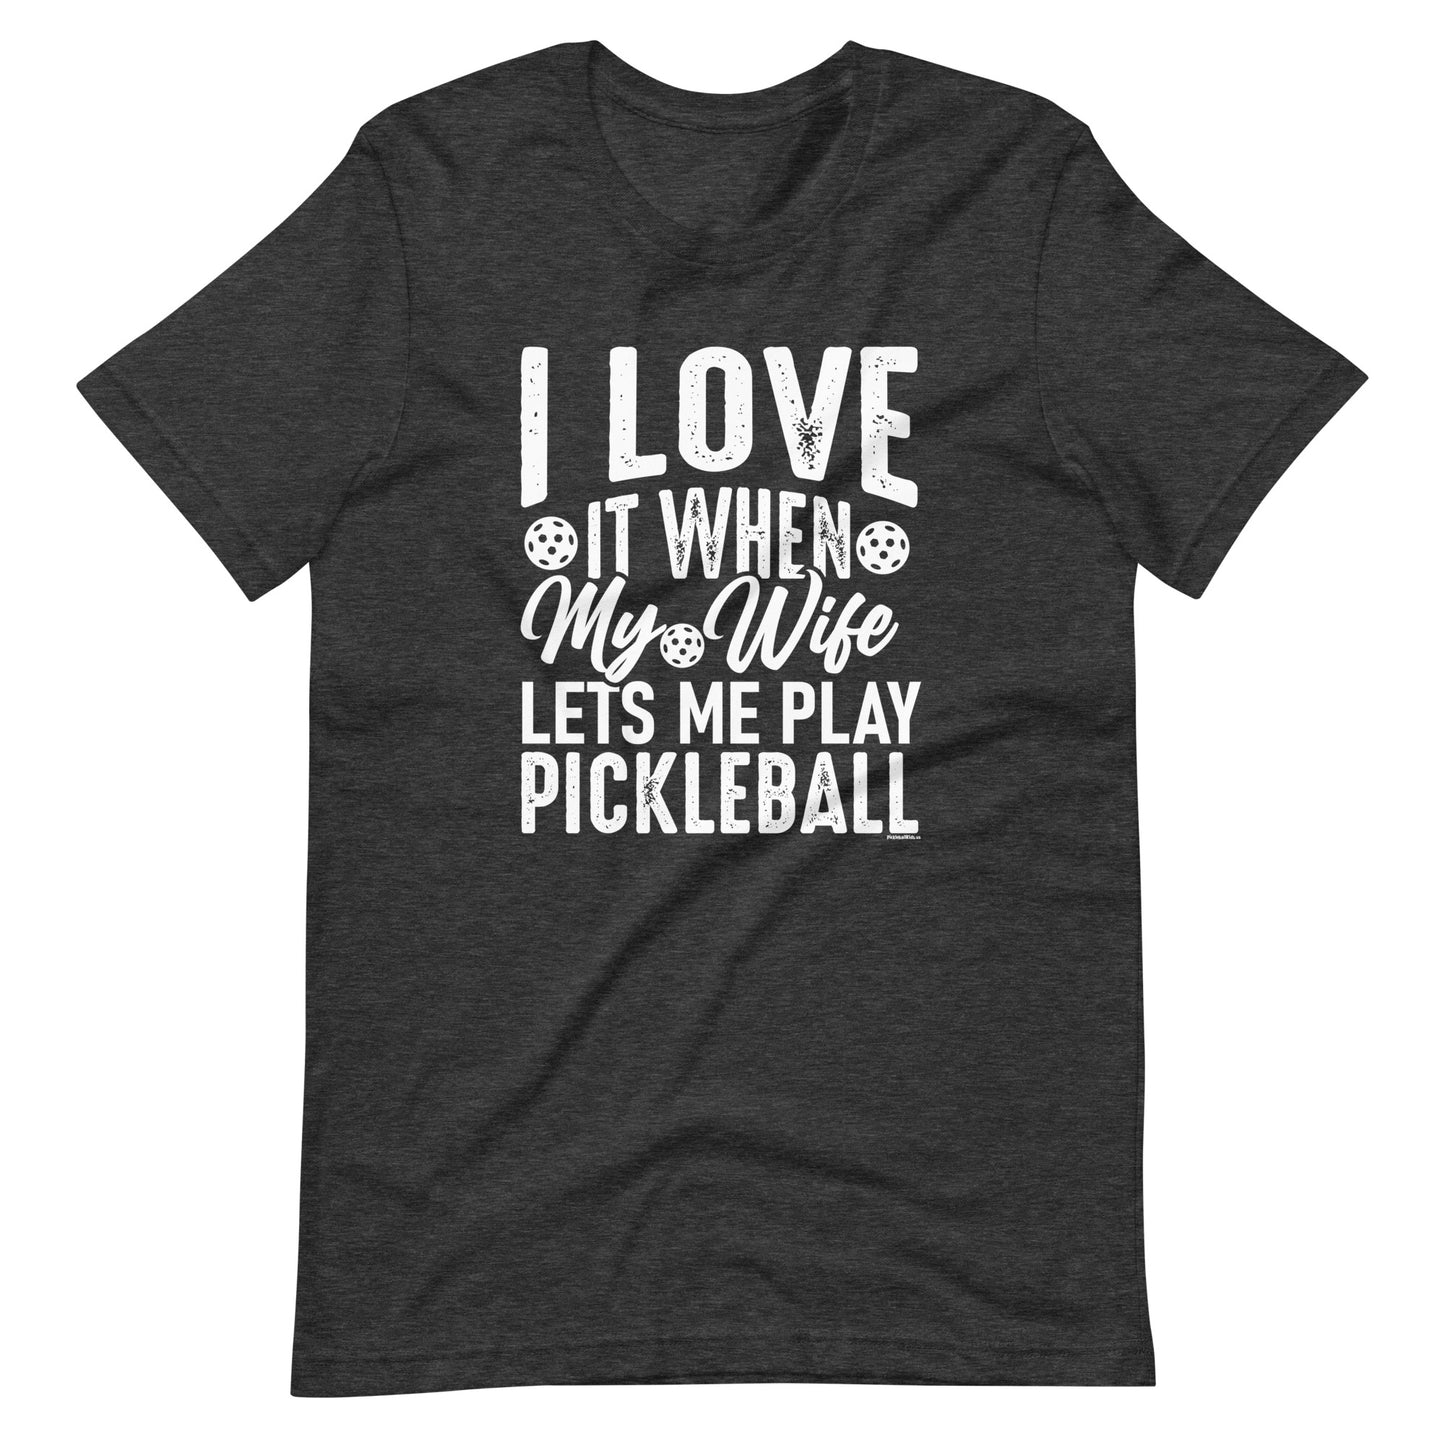 Funny  Pickleball Pun: "I Love It When My Wife Let Me Play Pickleball", Dark Grey Heather Unisex T-Shirt